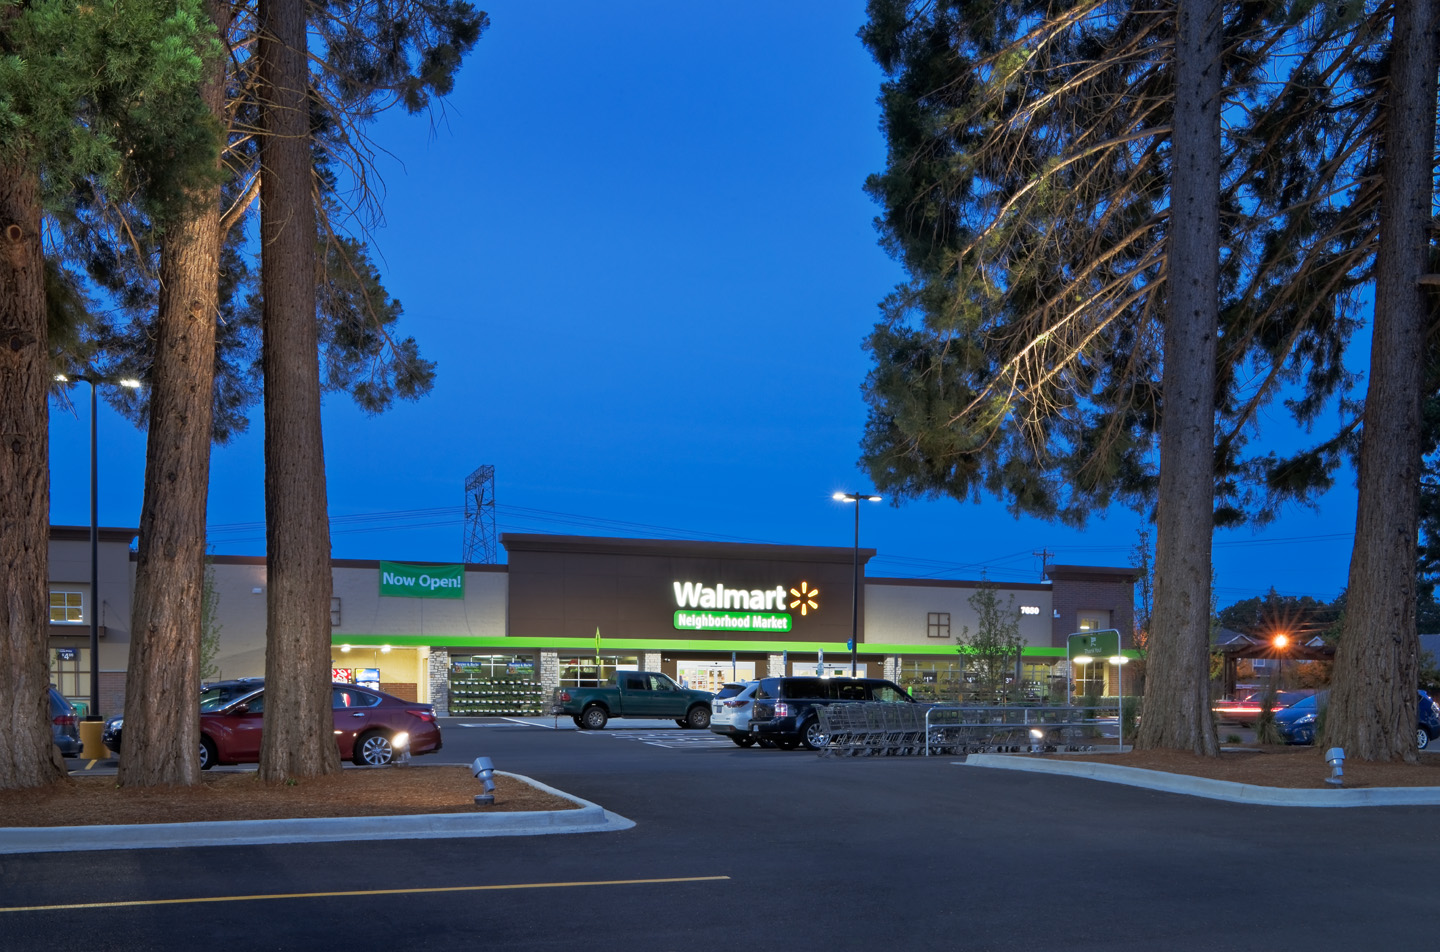 Walmart Neighborhood Market Orlando - Hey Baldwin Park Walmart shoppers! A  better Walmart is on the way. Stay tuned for some exciting upgrades to our  store. #BuildingABetterWalmart